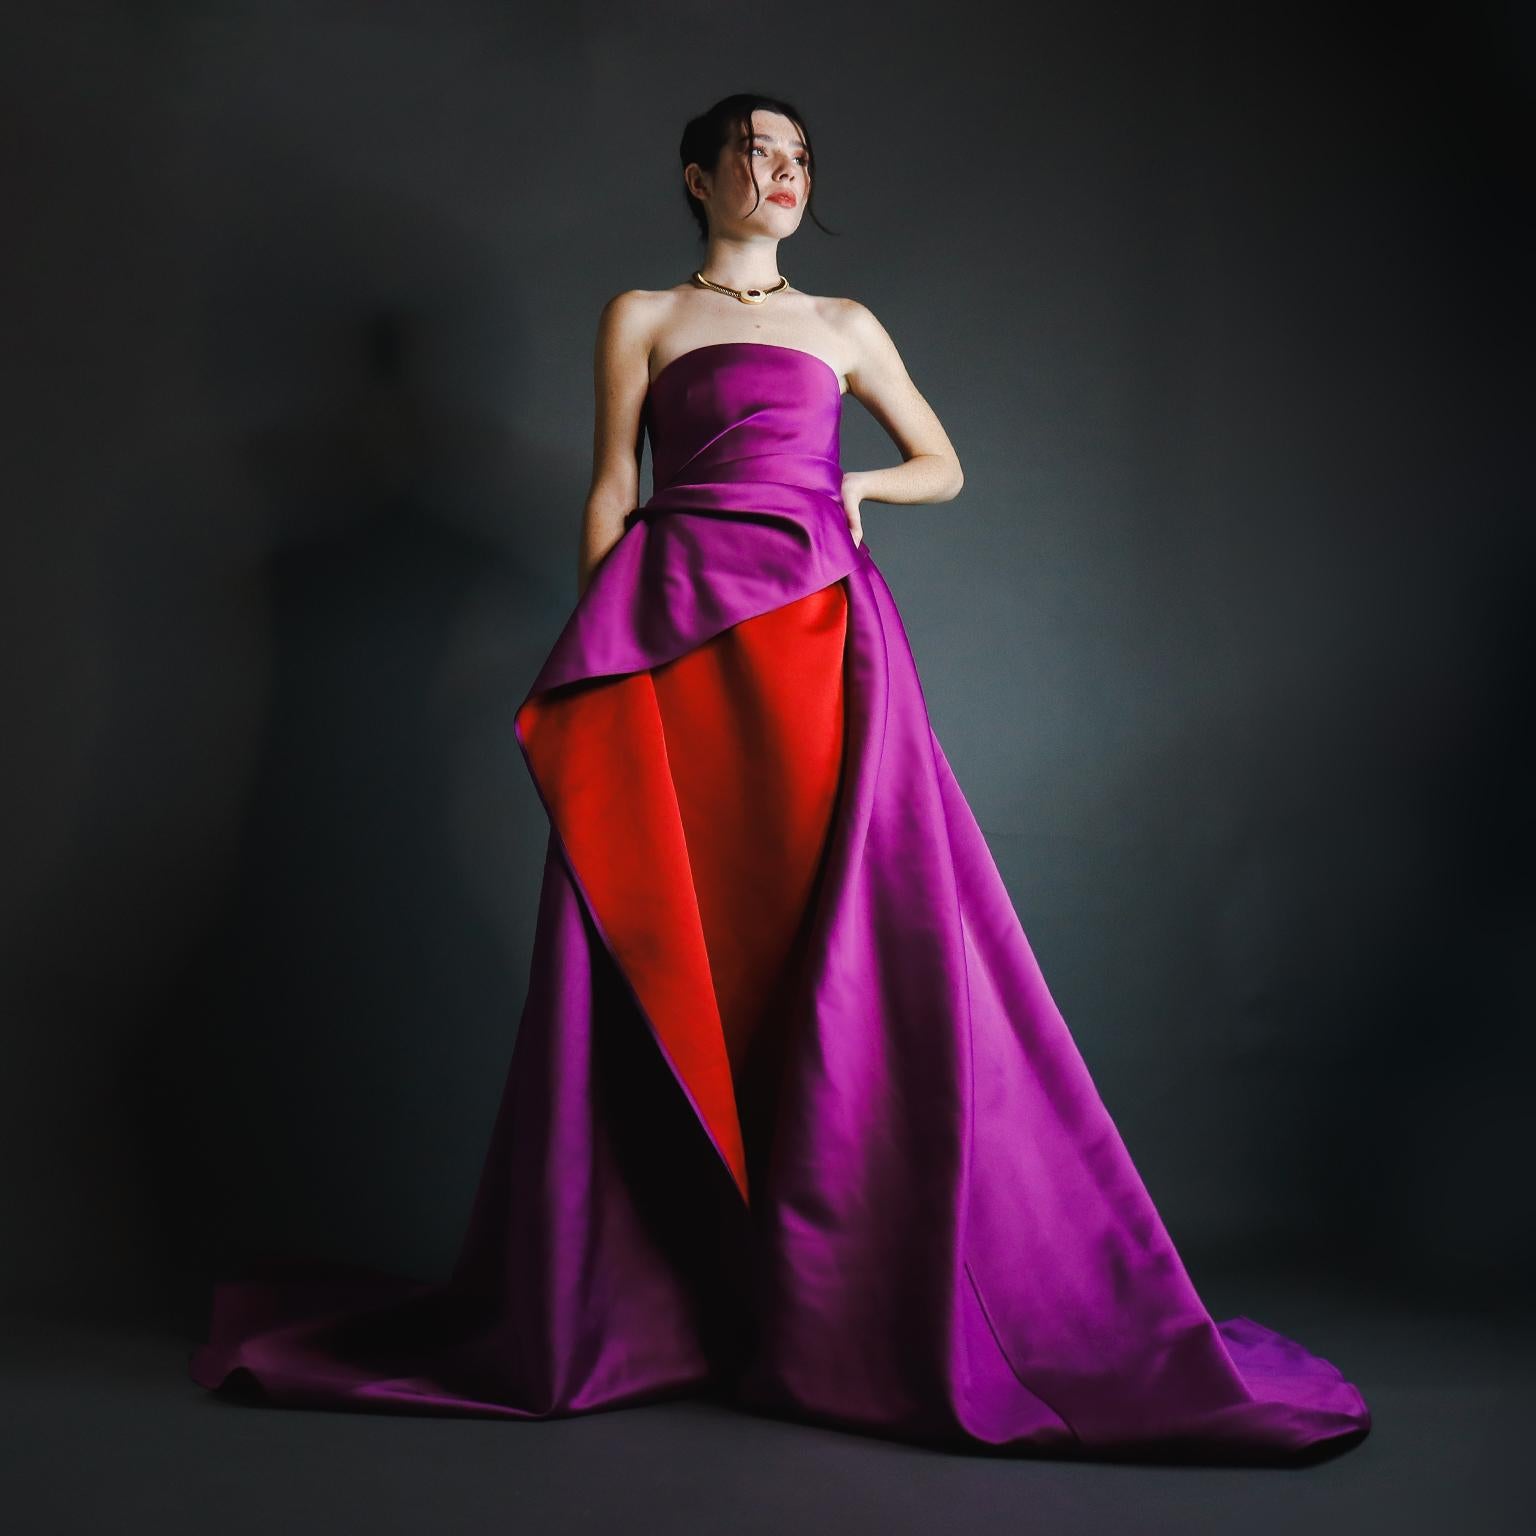 New Carolina Herrera 2022 Purple & Red Column Dress W Draped Overdress $5990 In Excellent Condition For Sale In Portland, OR